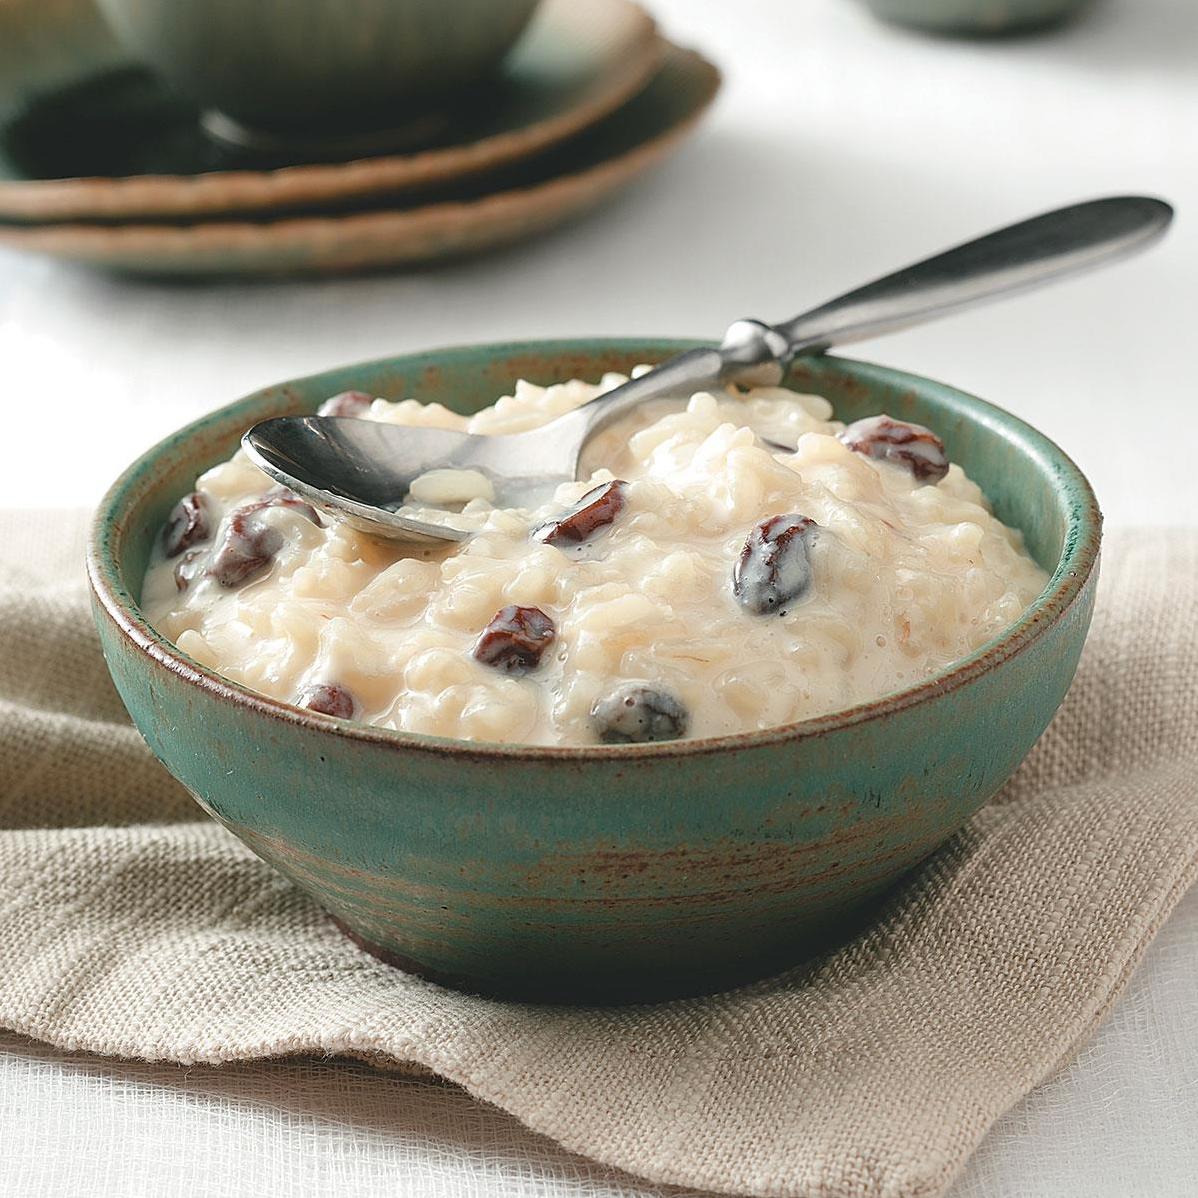  This Arroz Con Leche will warm your belly and your heart.